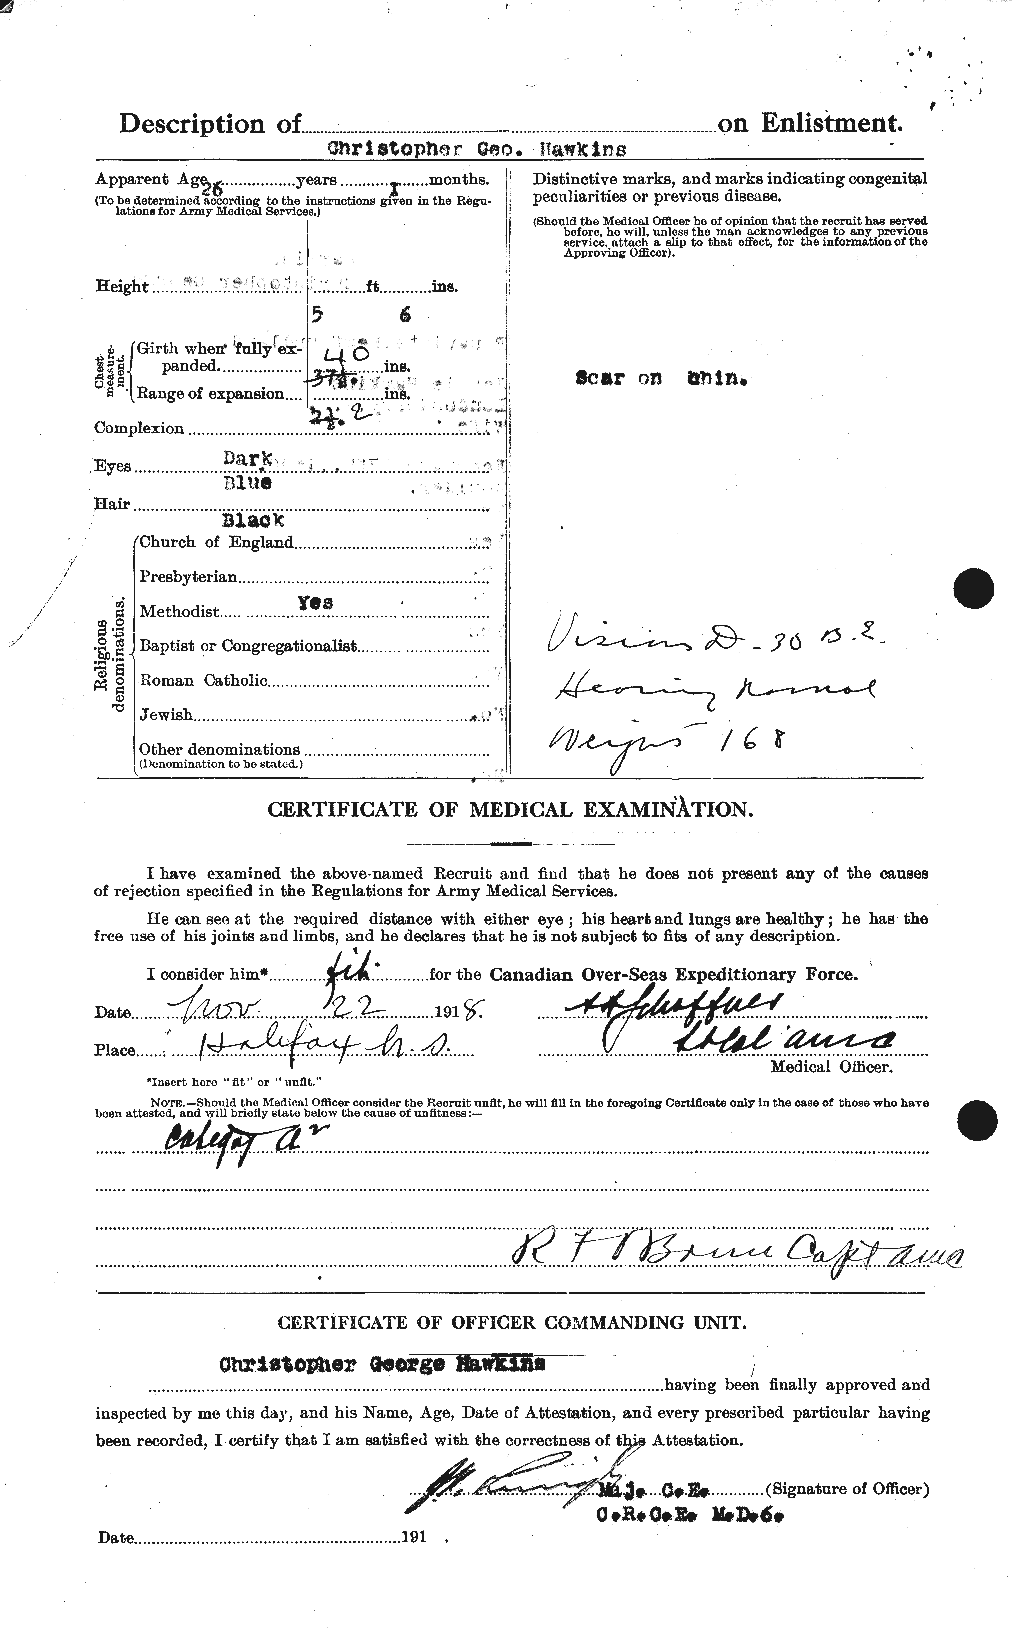 Personnel Records of the First World War - CEF 384660b